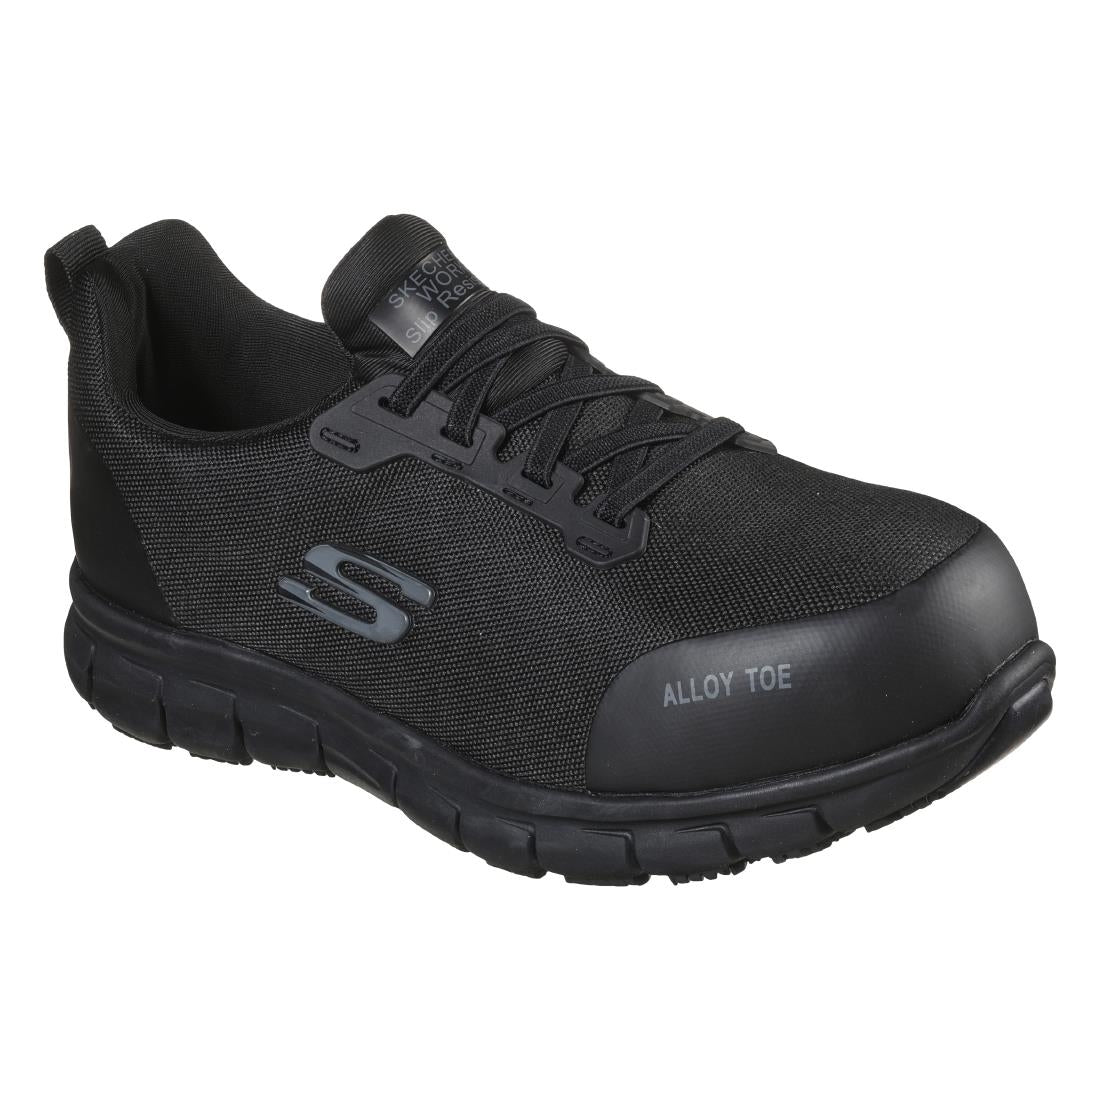 BB670-41 Skechers Womens Safety Shoe with Steel Toe Cap - Size 41 (UK 8) JD Catering Equipment Solutions Ltd